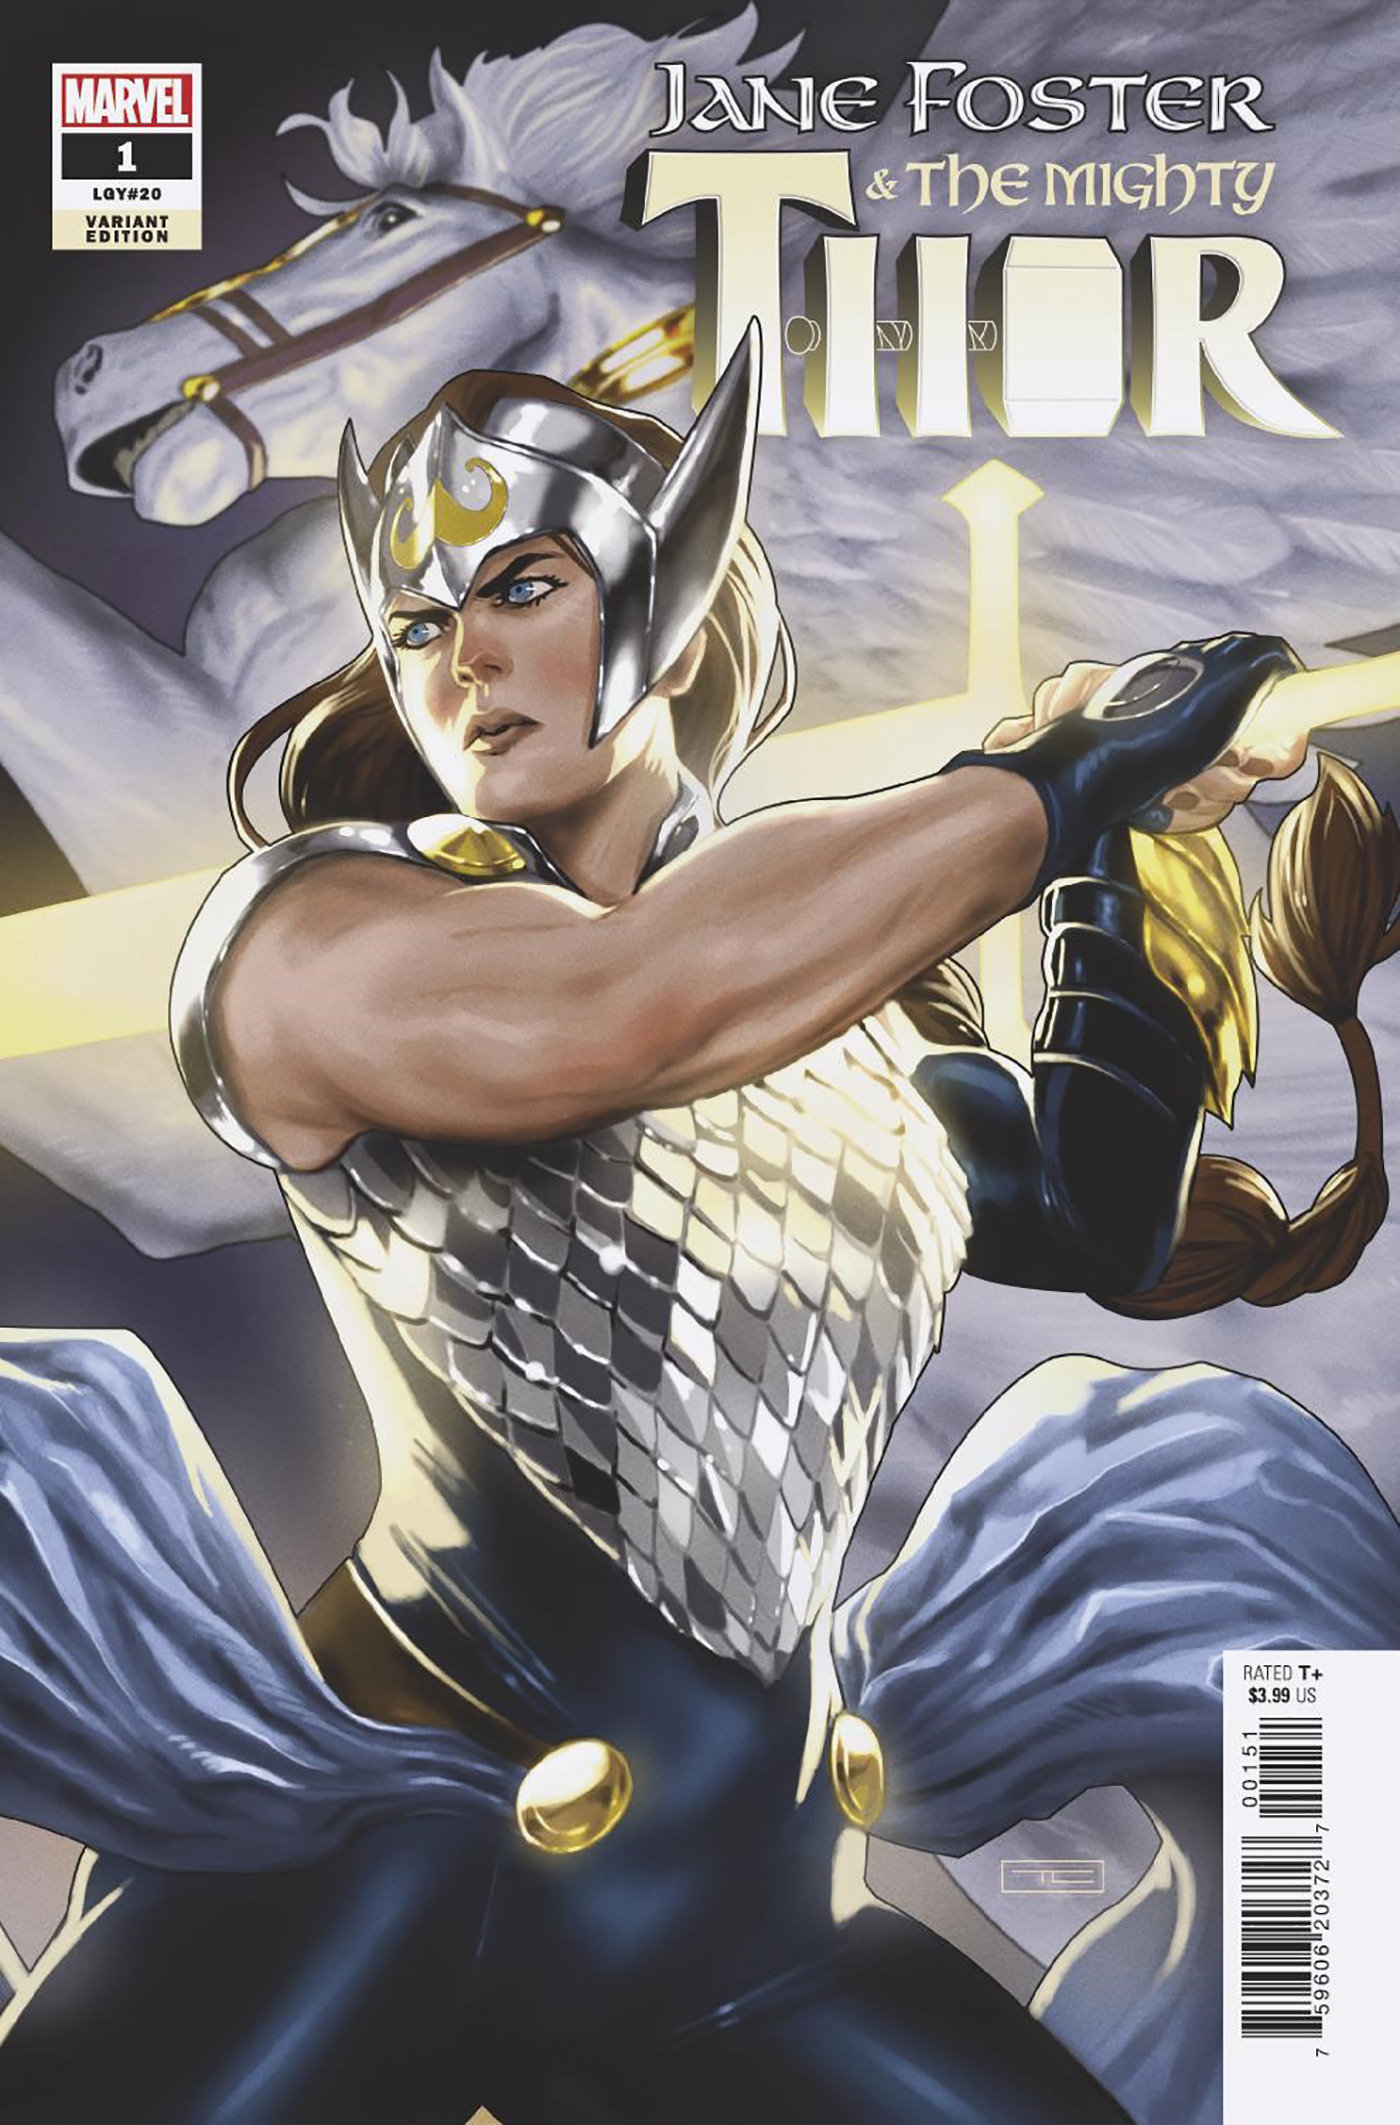 Jane Foster & The Mighty Thor #1 1 for 50 Incentive Clarke Variant (Of 5)